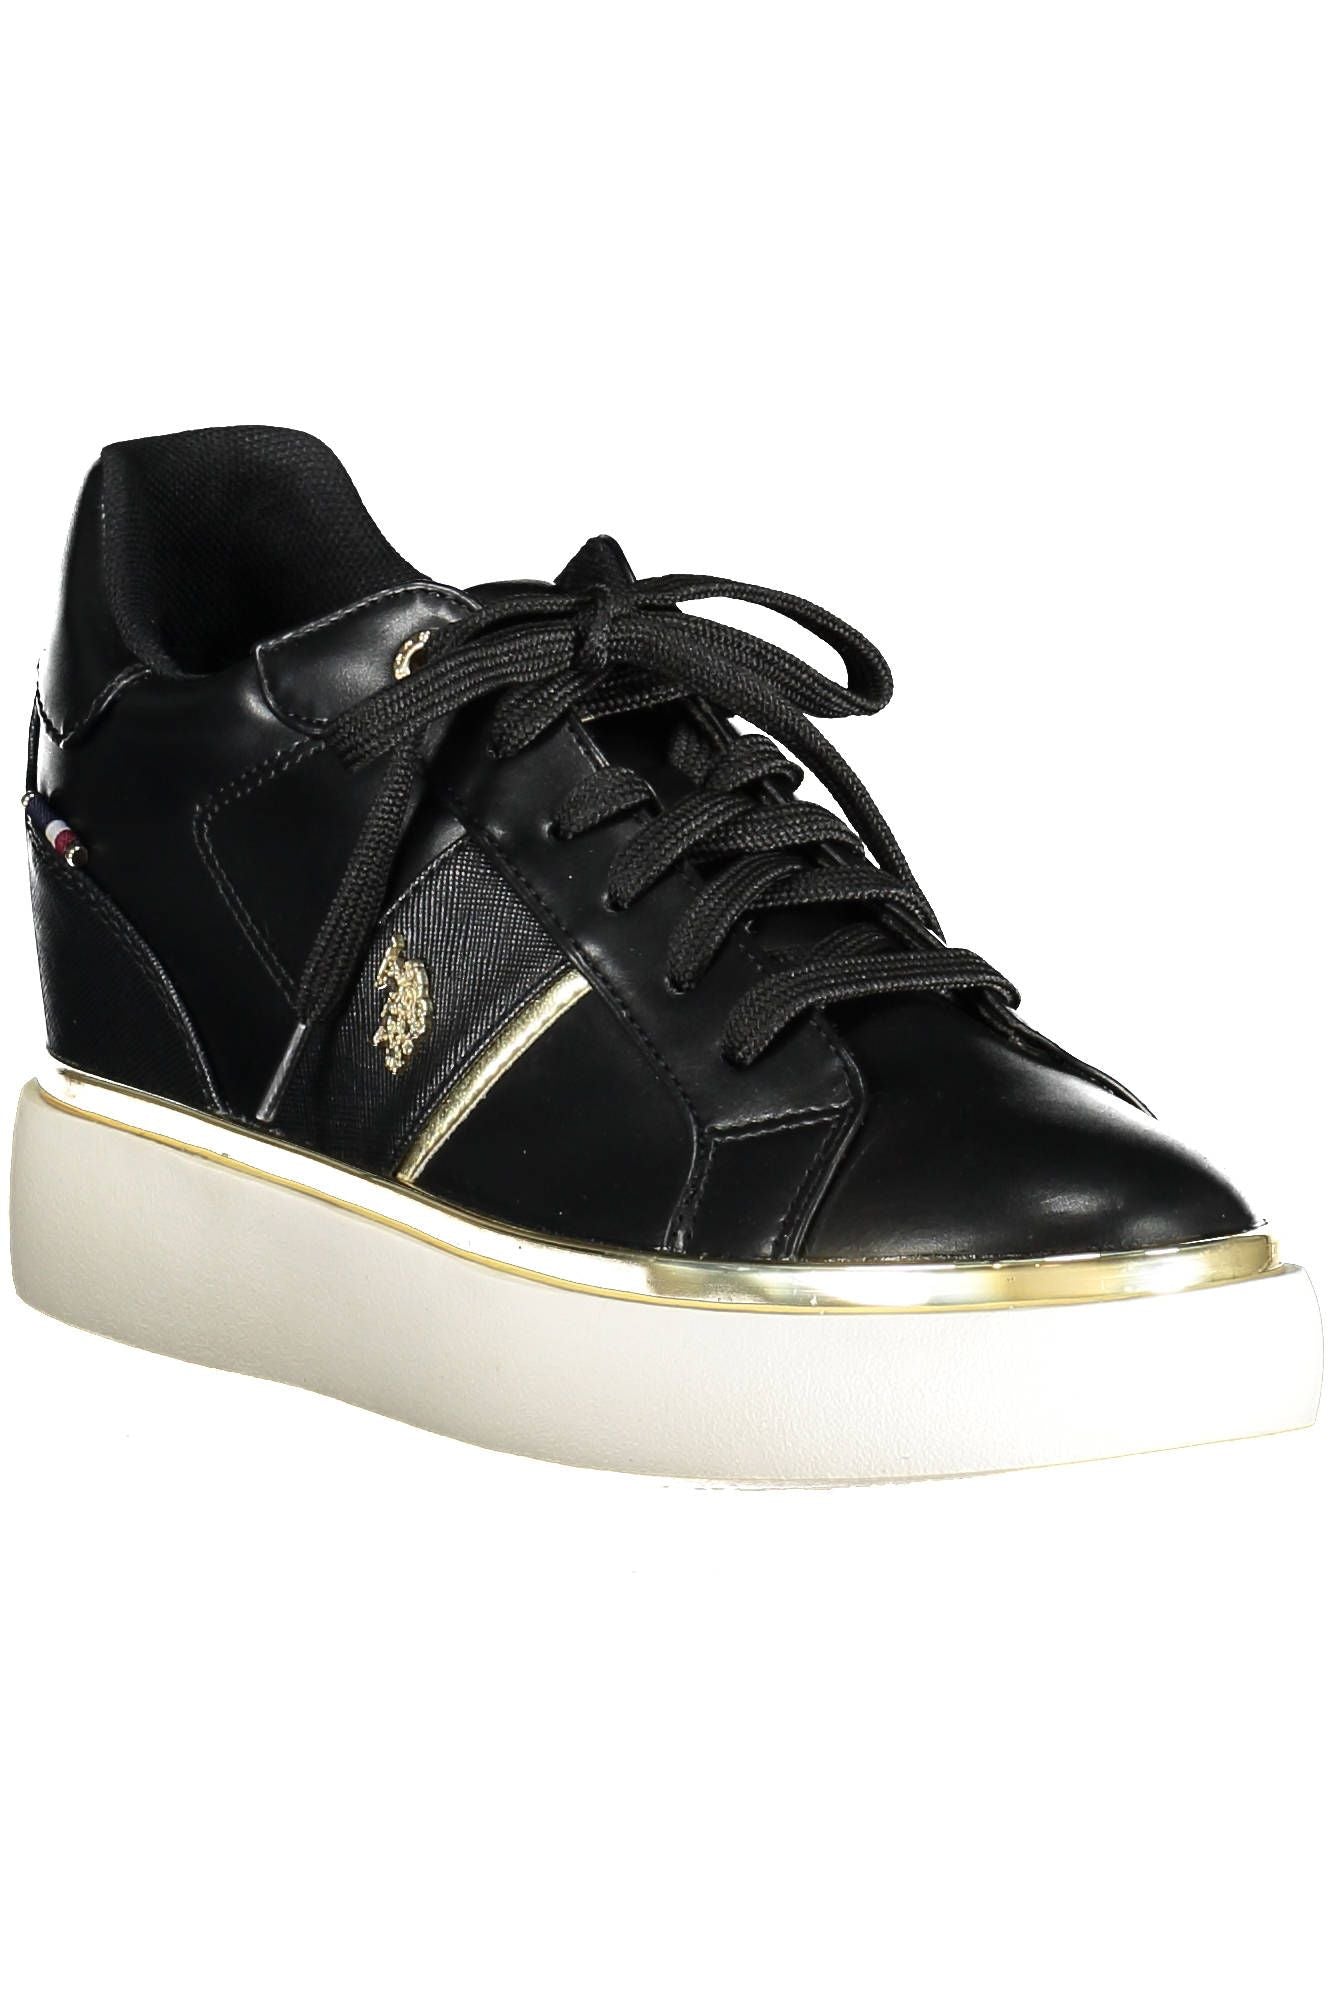 U.S. POLO ASSN. Chic Black Lace-Up Sneakers with Logo Detailing